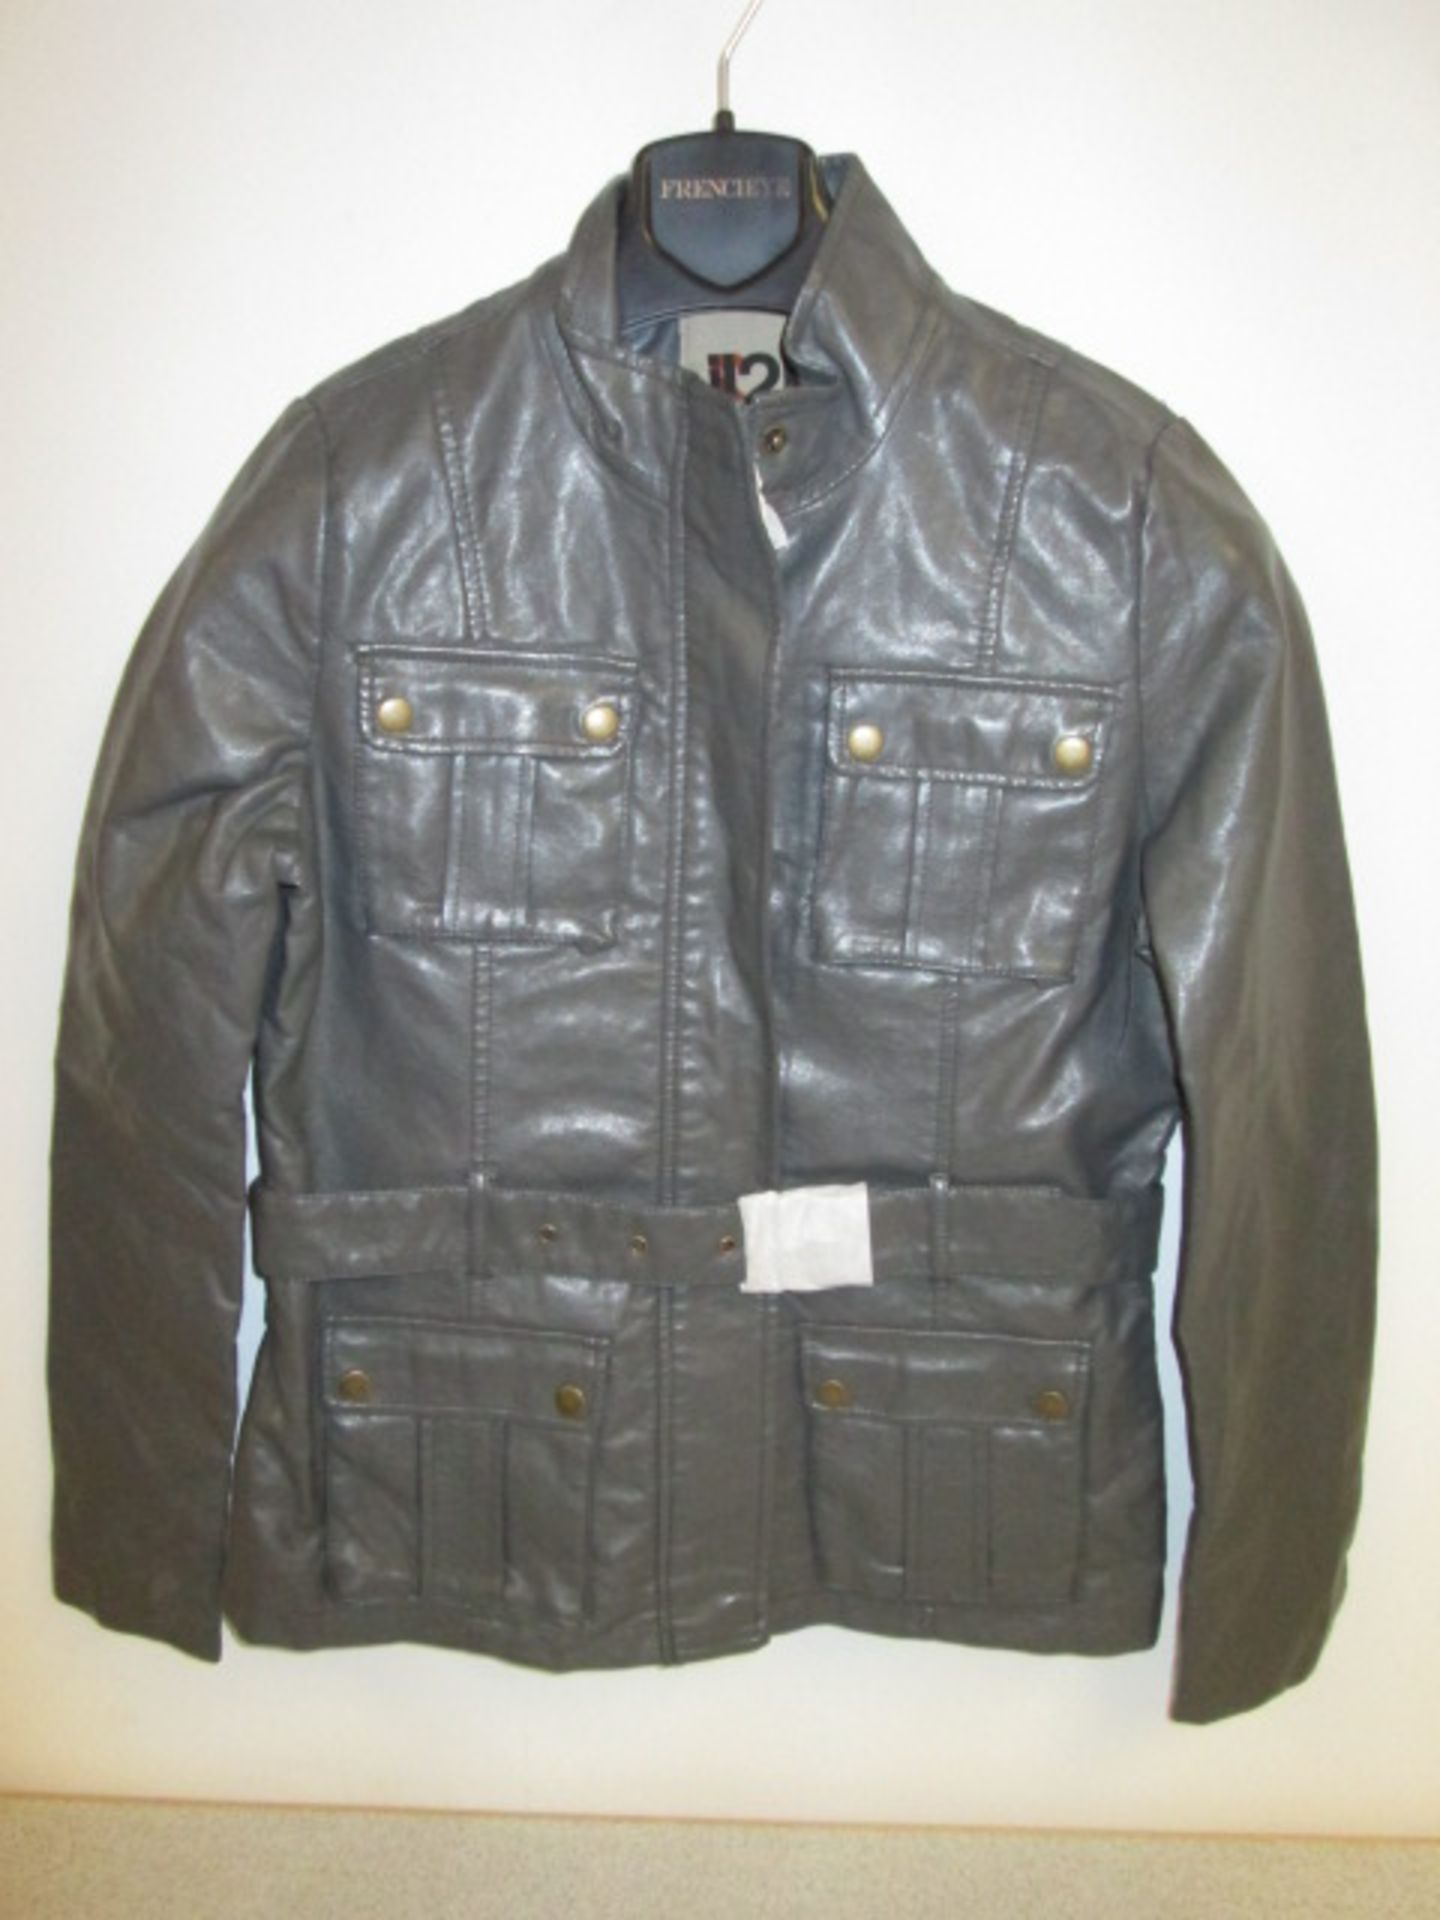 Lot to Include Approx 1200 Immitation Leather Ladies Jackets - Image 5 of 8